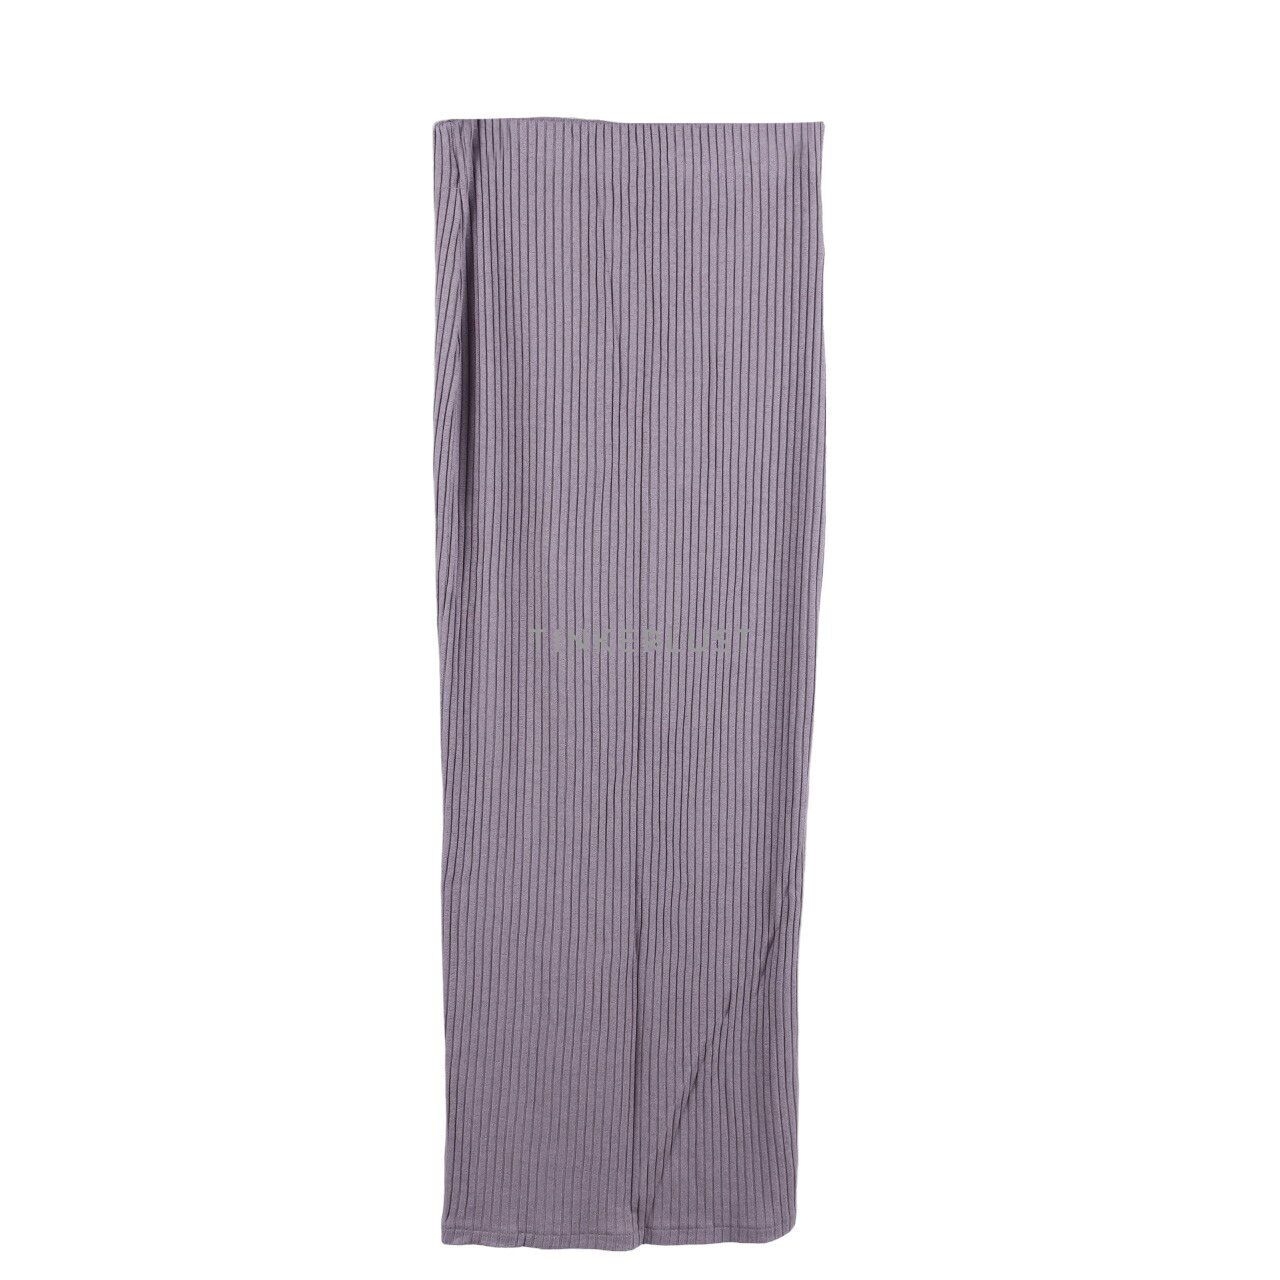 Private Collection Grey Slit Maxi Skirt